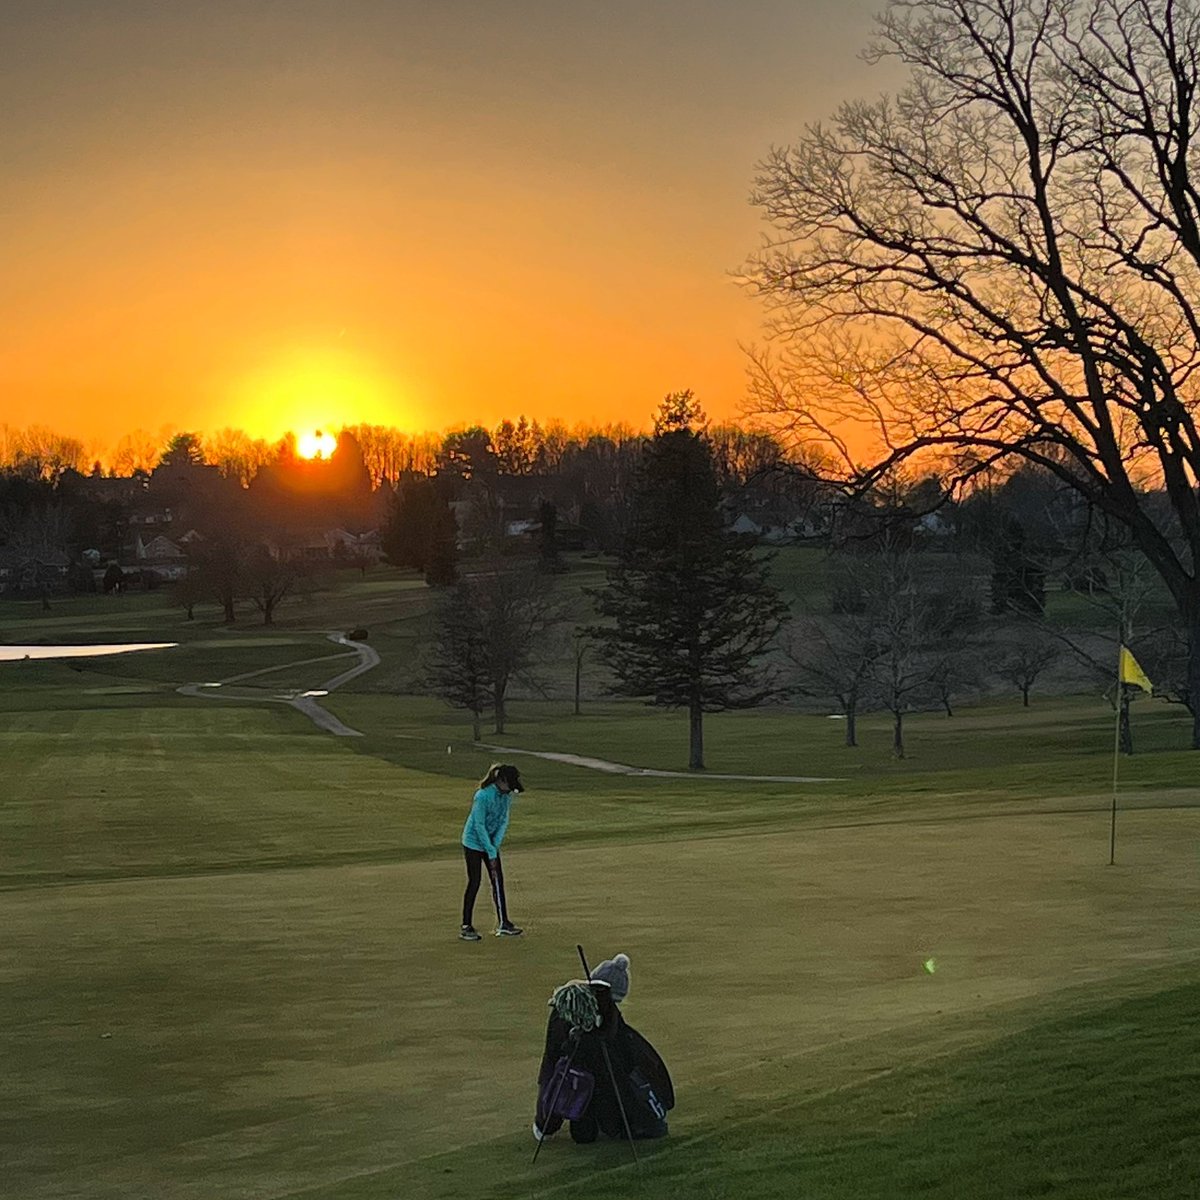 First @uskidsgolf tournament is in the books. What a view on #18! Looking forward to the spring season. 🏌🏻‍♀️⛳️🌅 @FPD8_2  #krd #girlsgolfrocks #birdiesbeforeboys